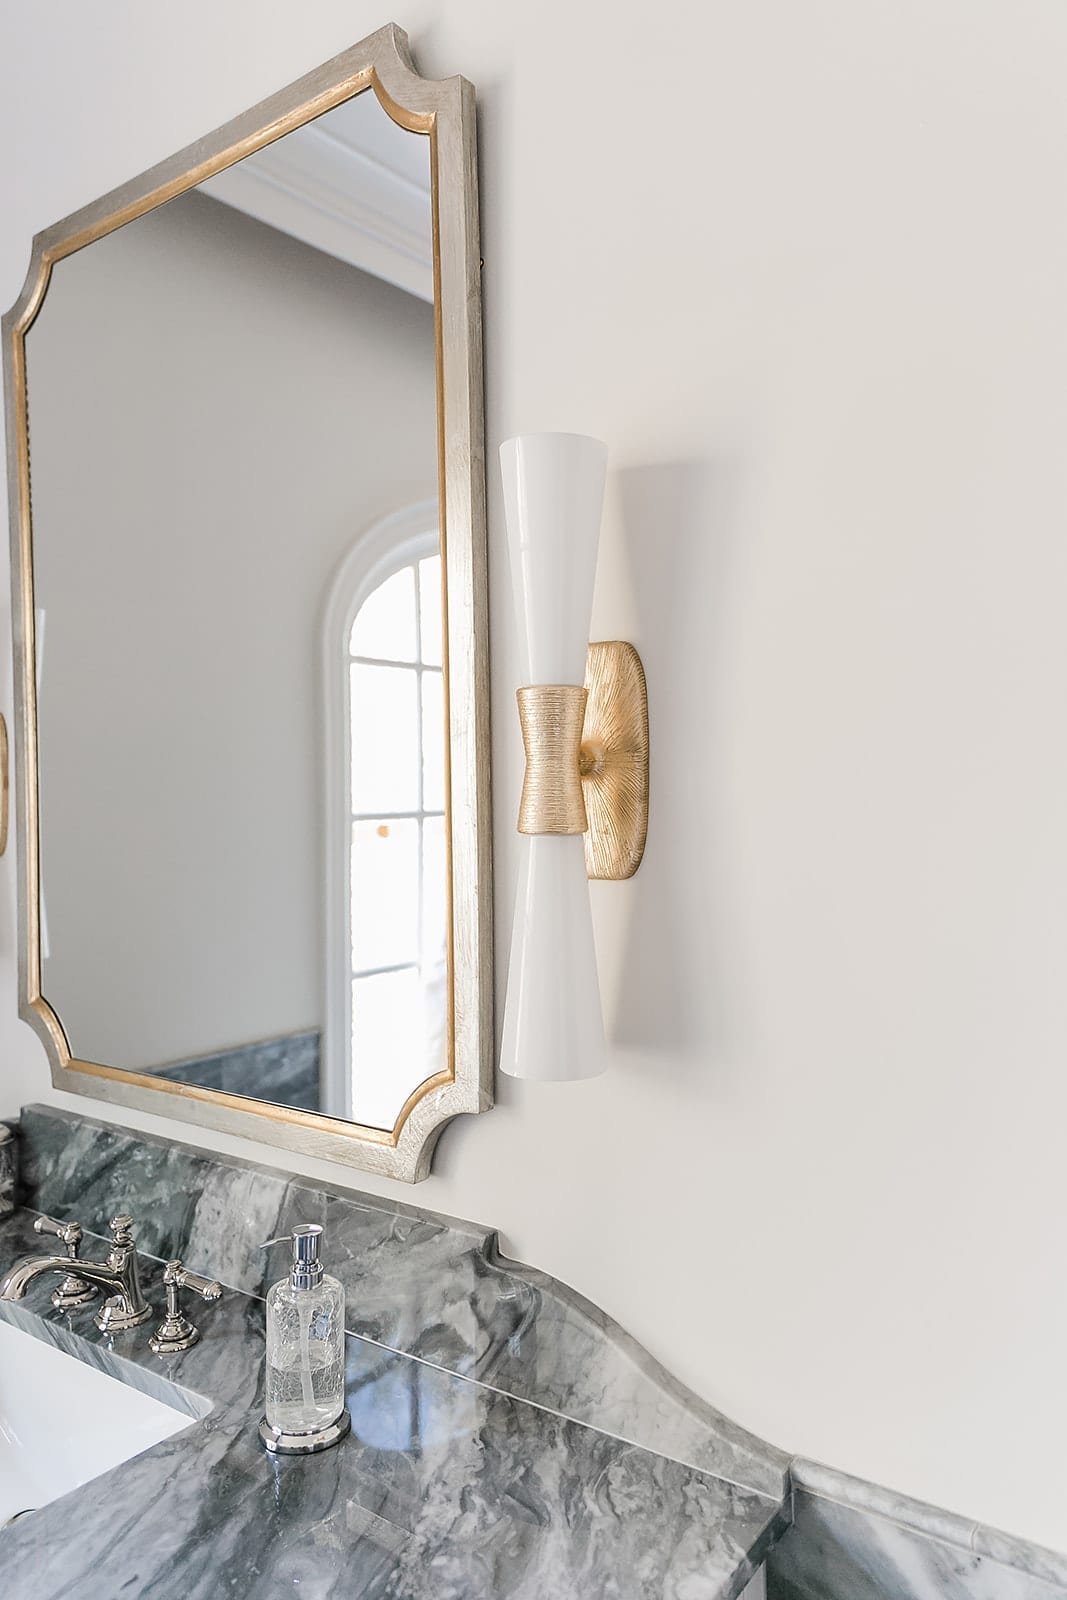 Kelly Wearstler Sconce in bathroom with gray marble and silver and gray mirror.